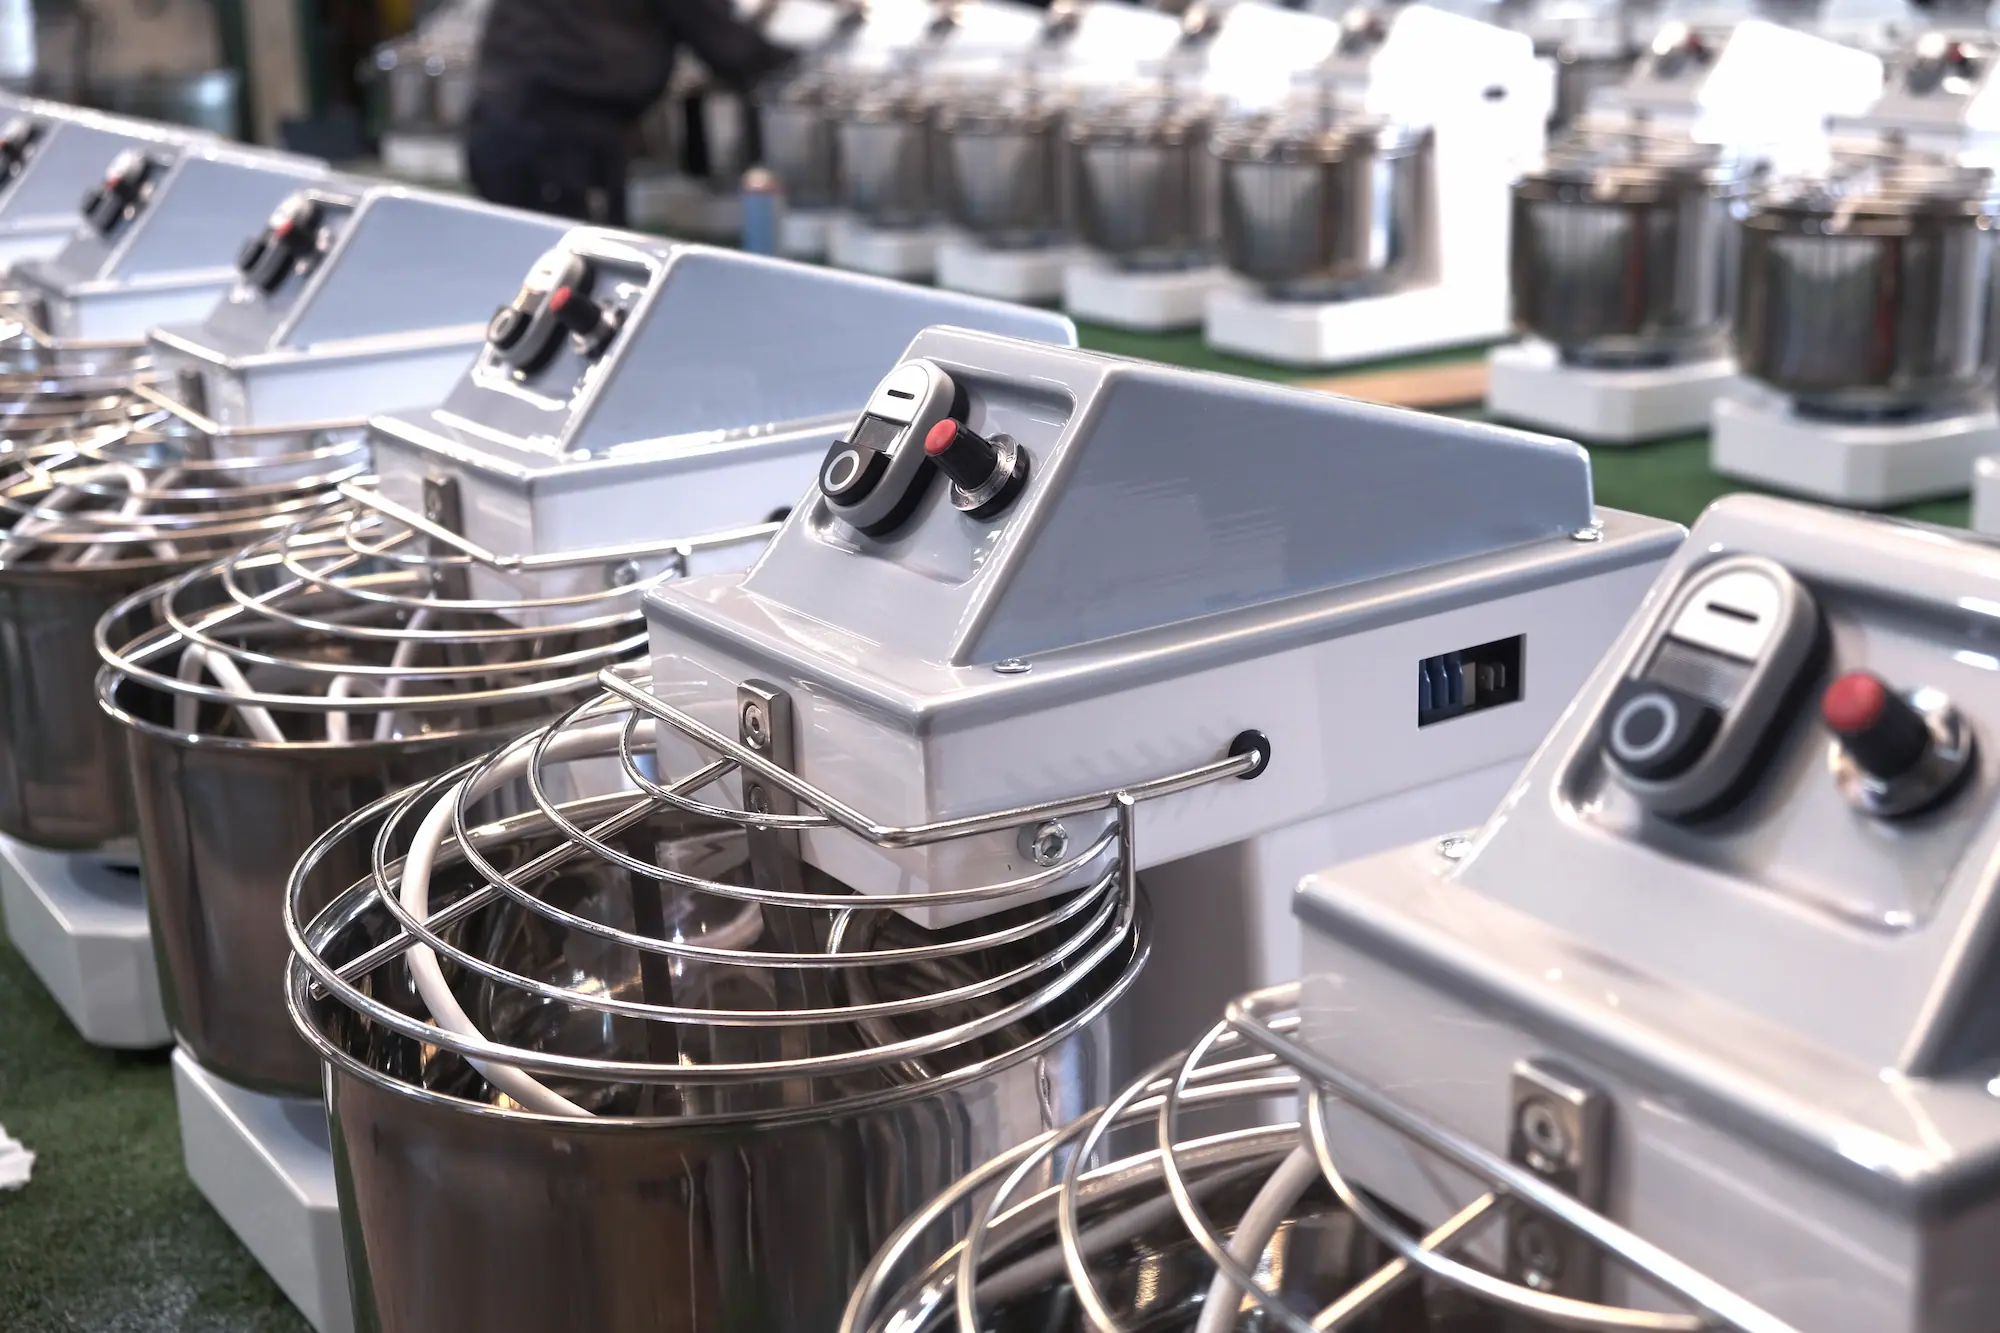 Production of mixers